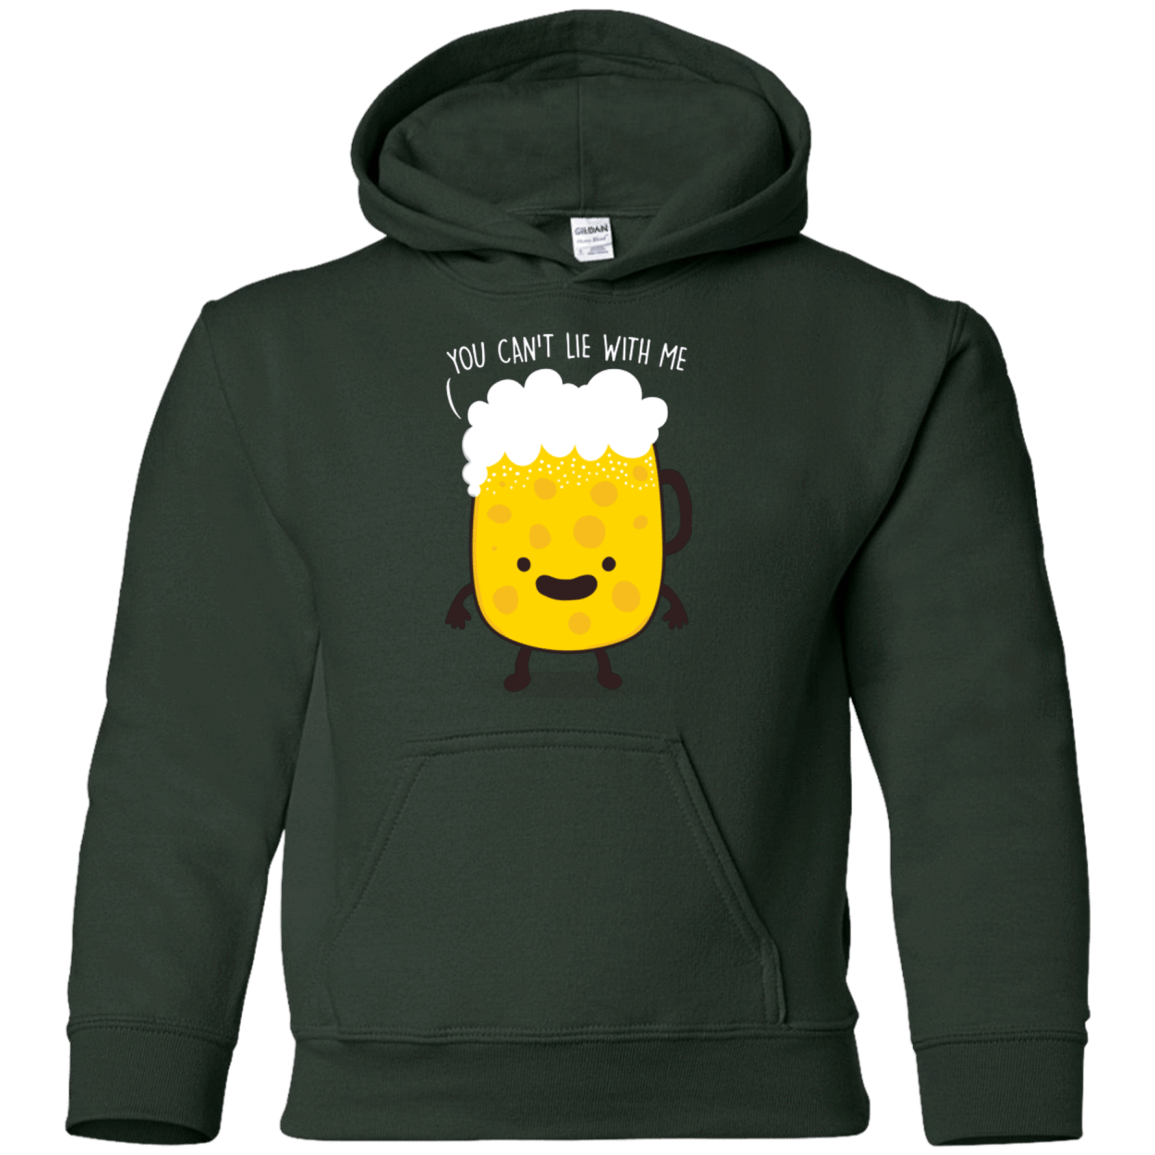 Sweatshirts Forest Green / YS Beerfull Youth Hoodie